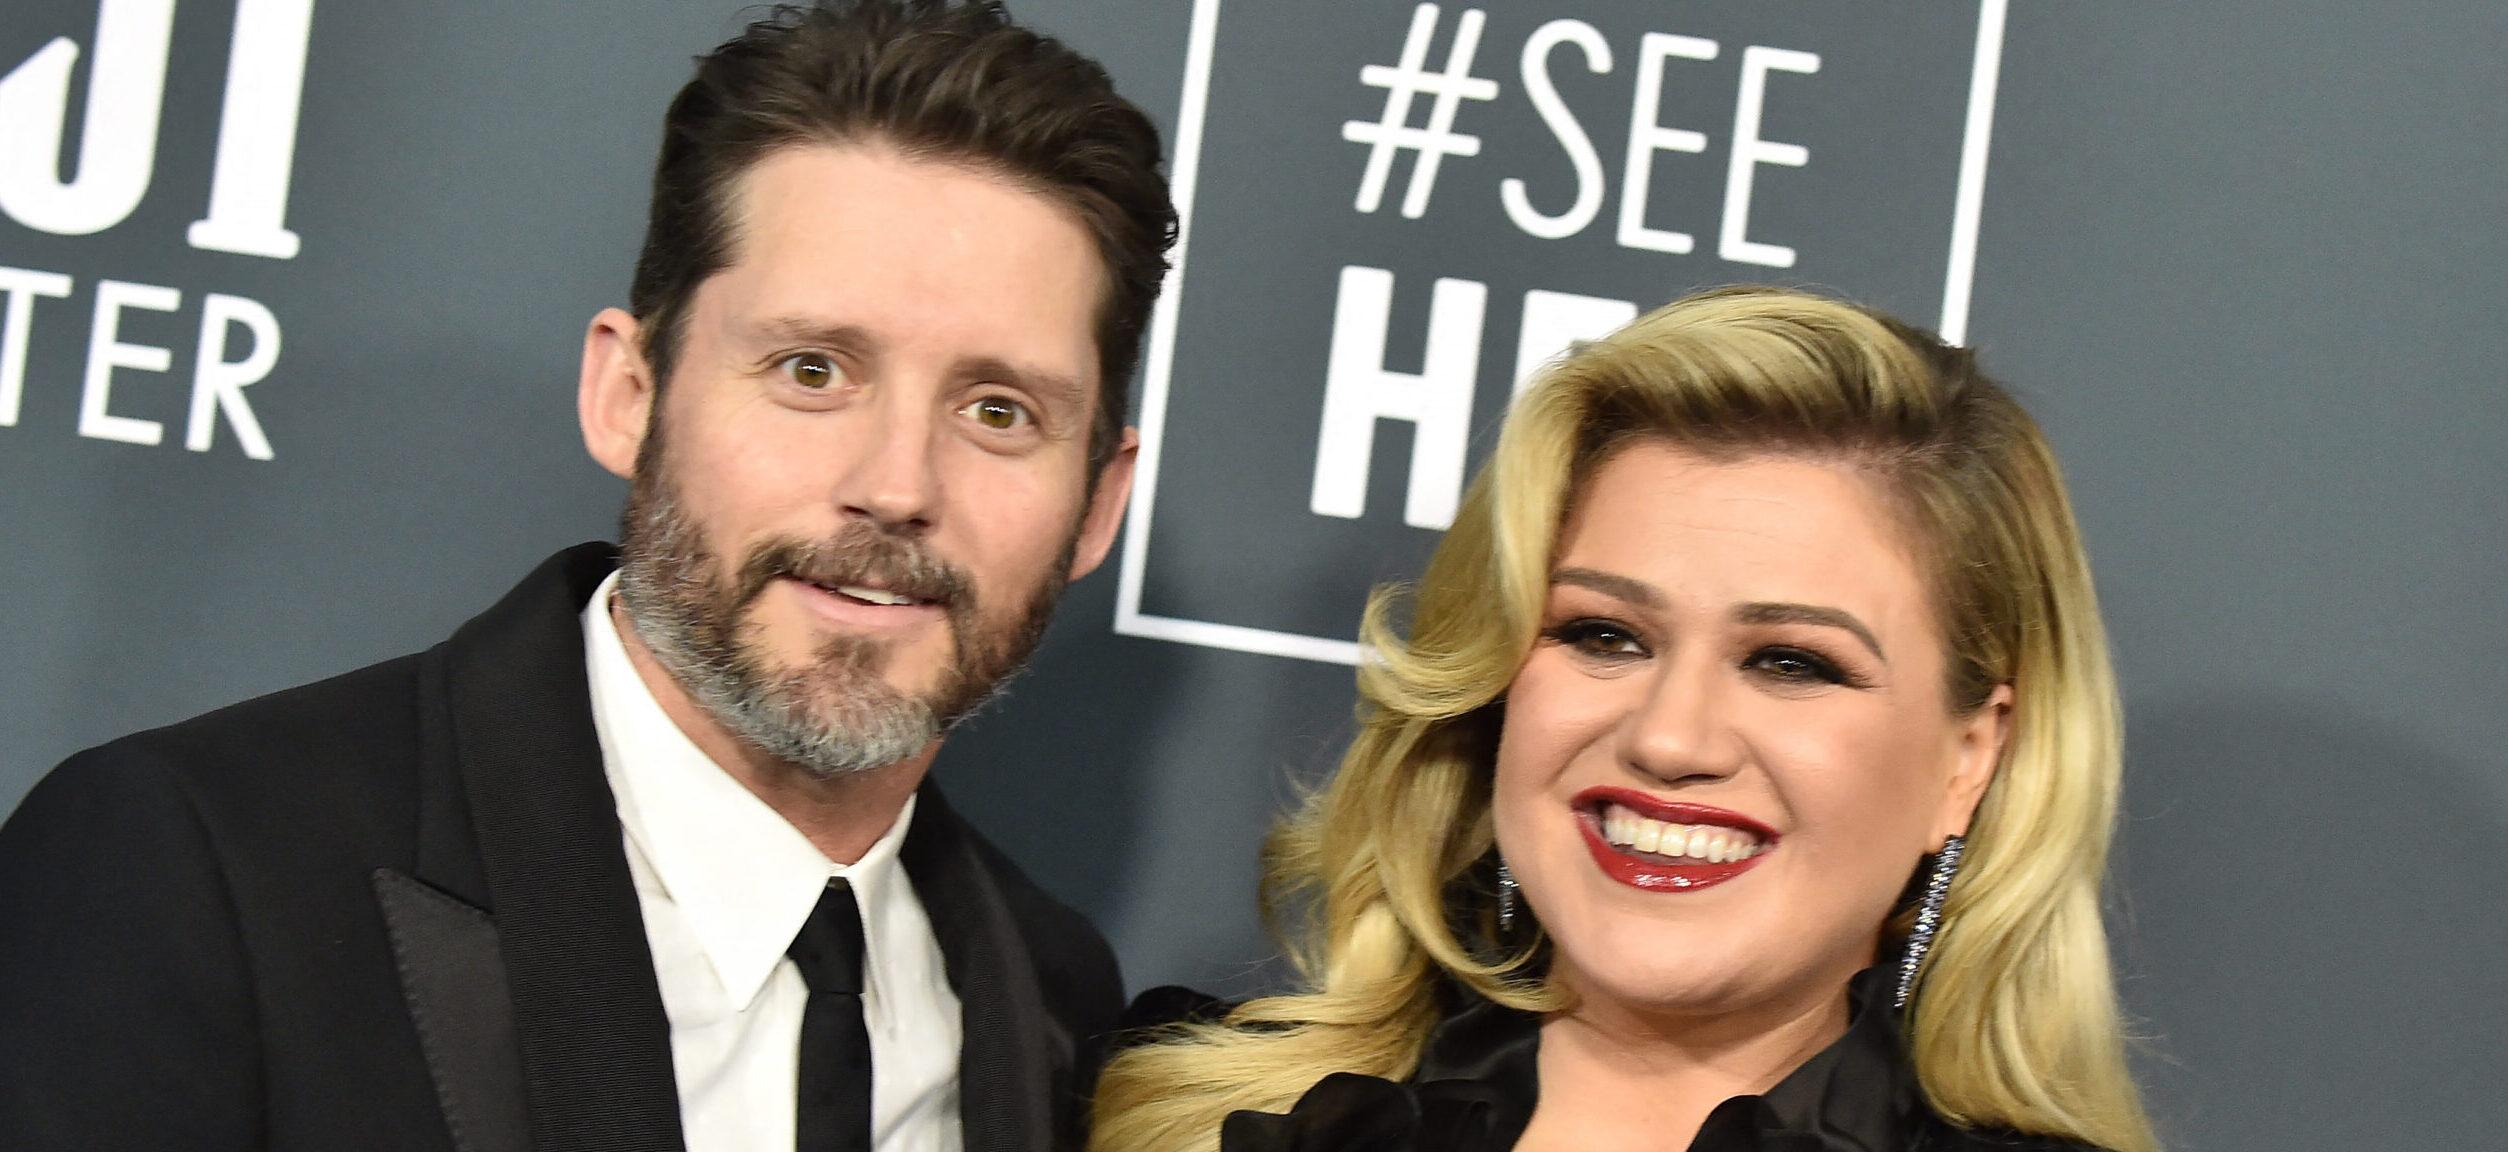 Kelly Clarkson Wins Back Millions From Ex Husband For Overcharging As Her Manager